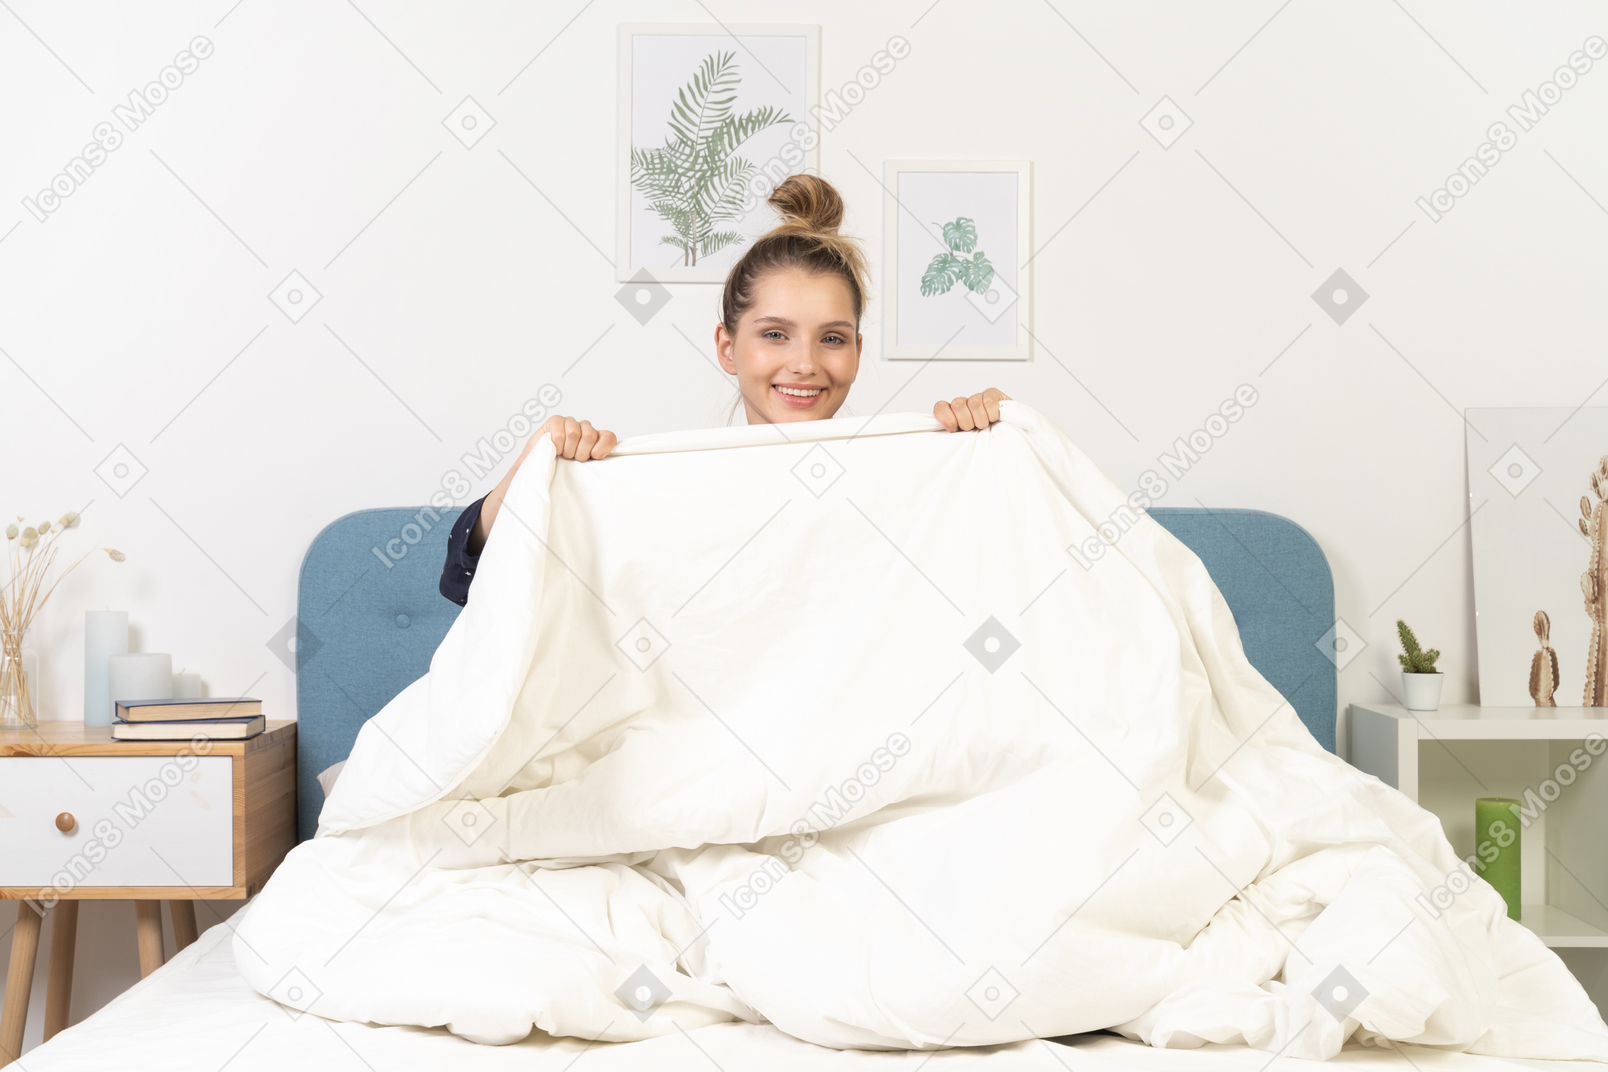 Front view of a smiling young woman in pajamas hiding behind the blanket staying in bed